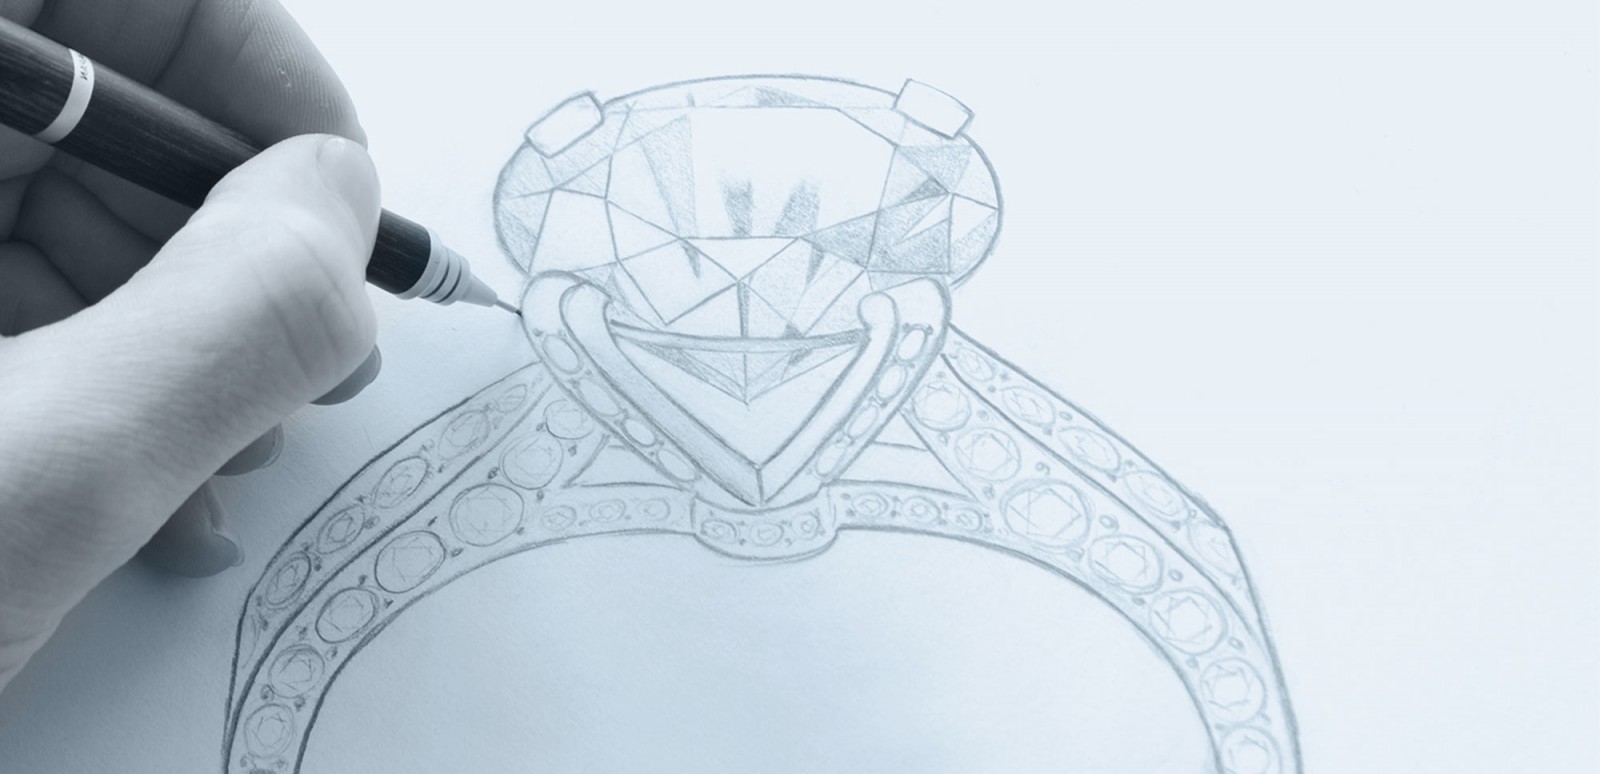 Link to The Process. Custom jewellery designer Julian Bartrom hand drawing a custom engagement ring design